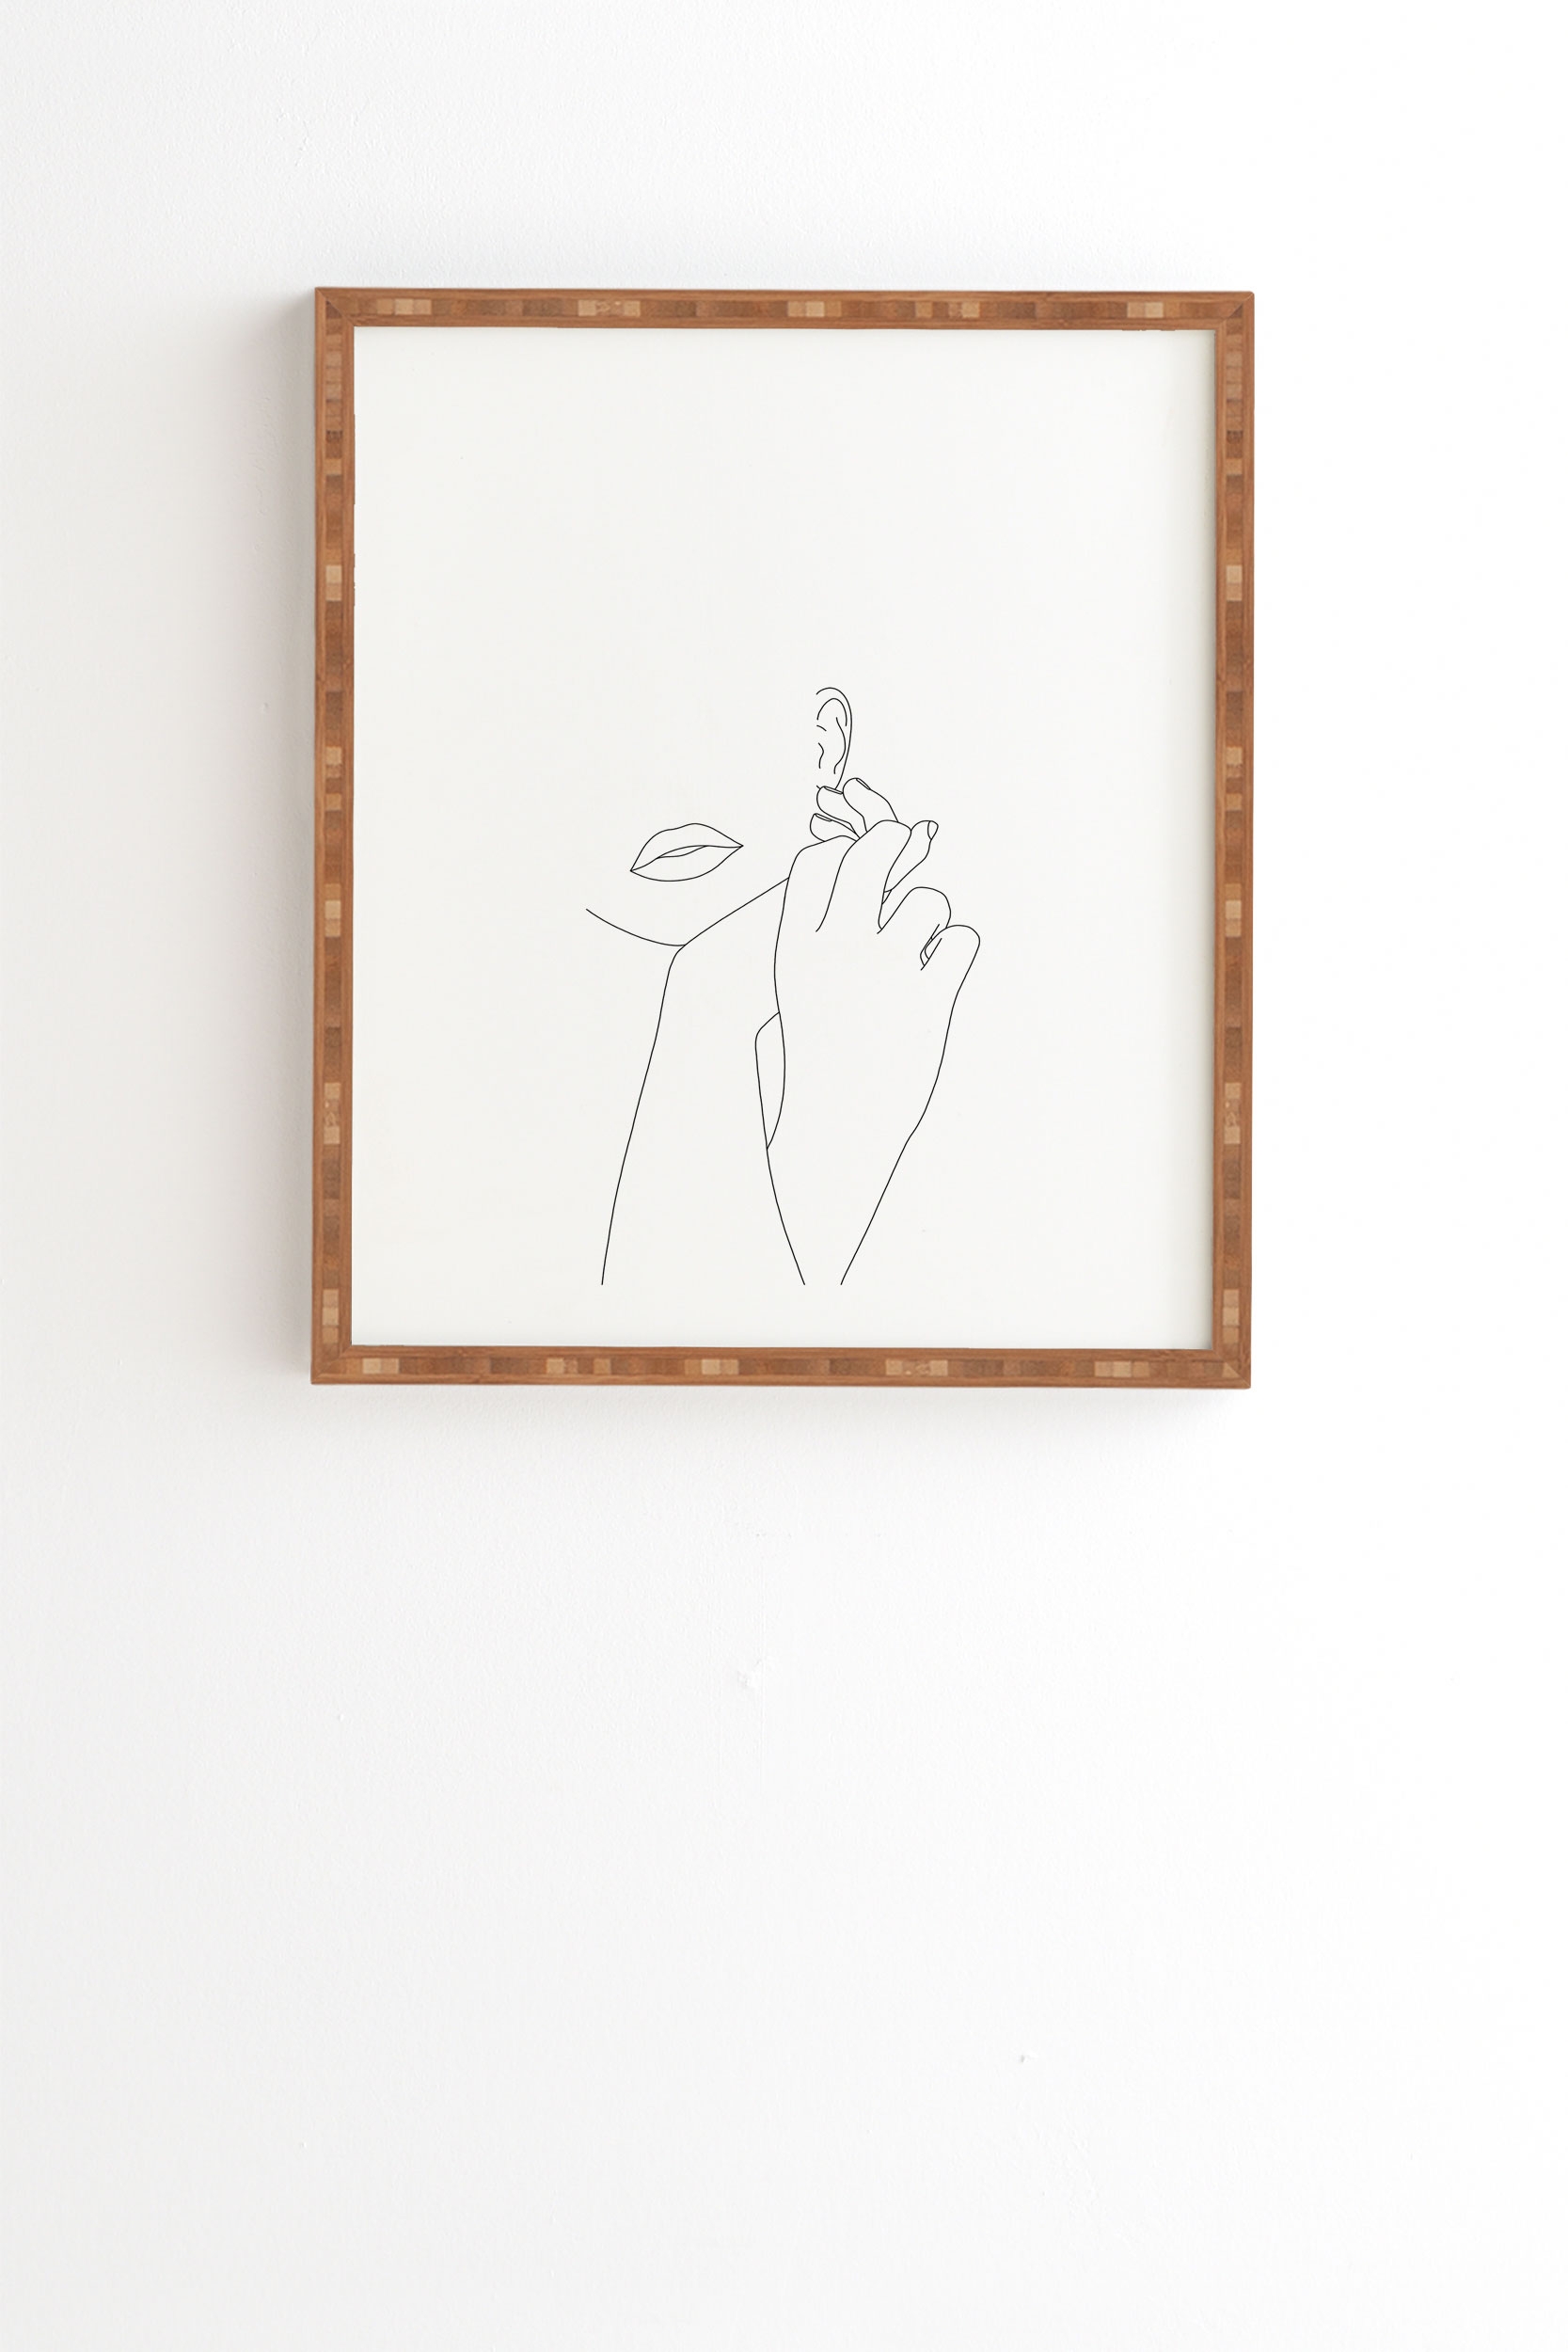 Minimalist Face Illustration by The Colour Study - Framed Wall Art Bamboo 19" x 22.4" - Image 0